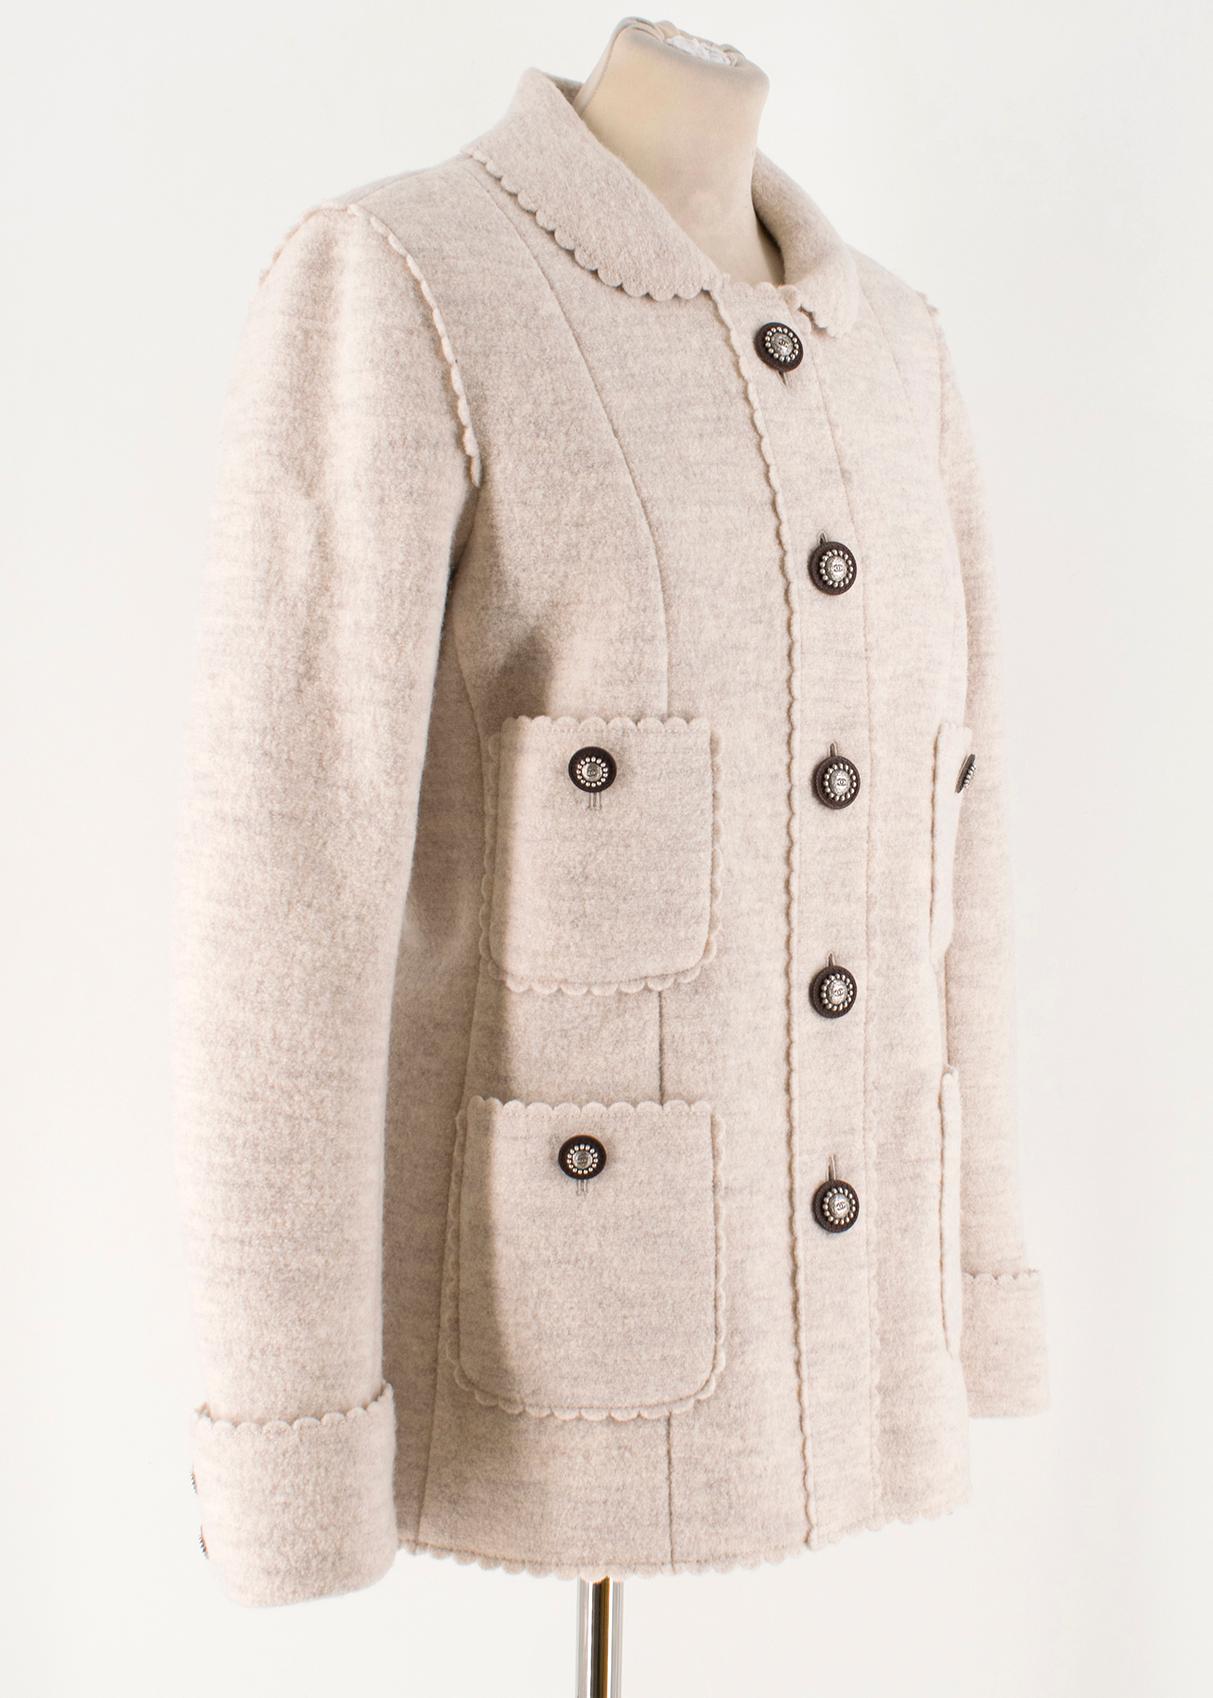 Chanel Ecru Wool Scalloped Detail Jacket

- Pure wool in an ecru shade
- Scalloped detail around the cuffs, collar, pockets, hem, shoulder and button placket
- Four buttoned patch pockets on the front  
- Button fastening
- Beautiful intricate